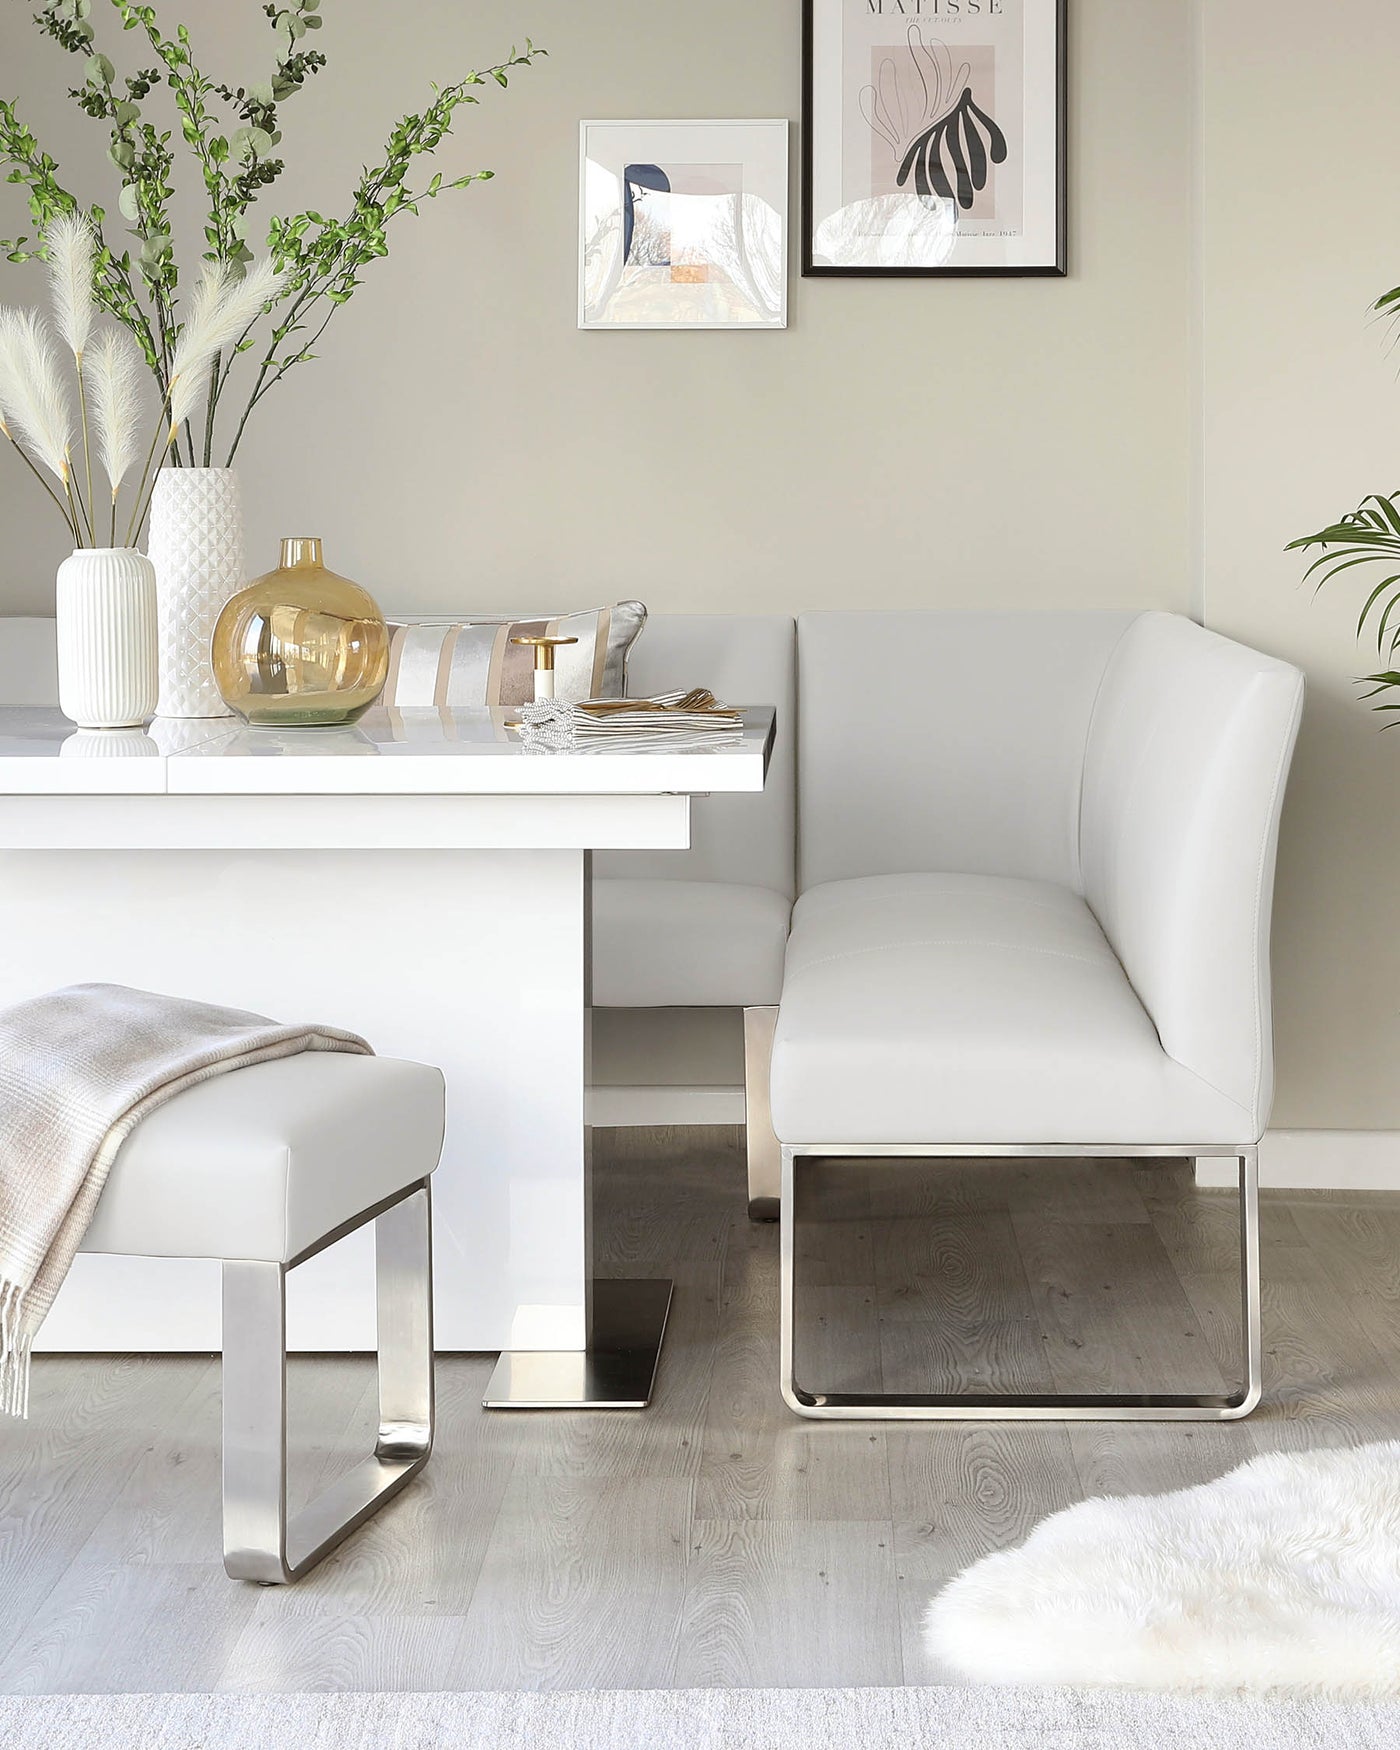 Modern minimalist furniture set featuring a sleek white dining bench with a high backrest, paired with a matching white rectangular dining table, both supported by clean-lined metallic bases. A simple yet elegant white ottoman with a metallic base complements the set, positioned beside the bench.